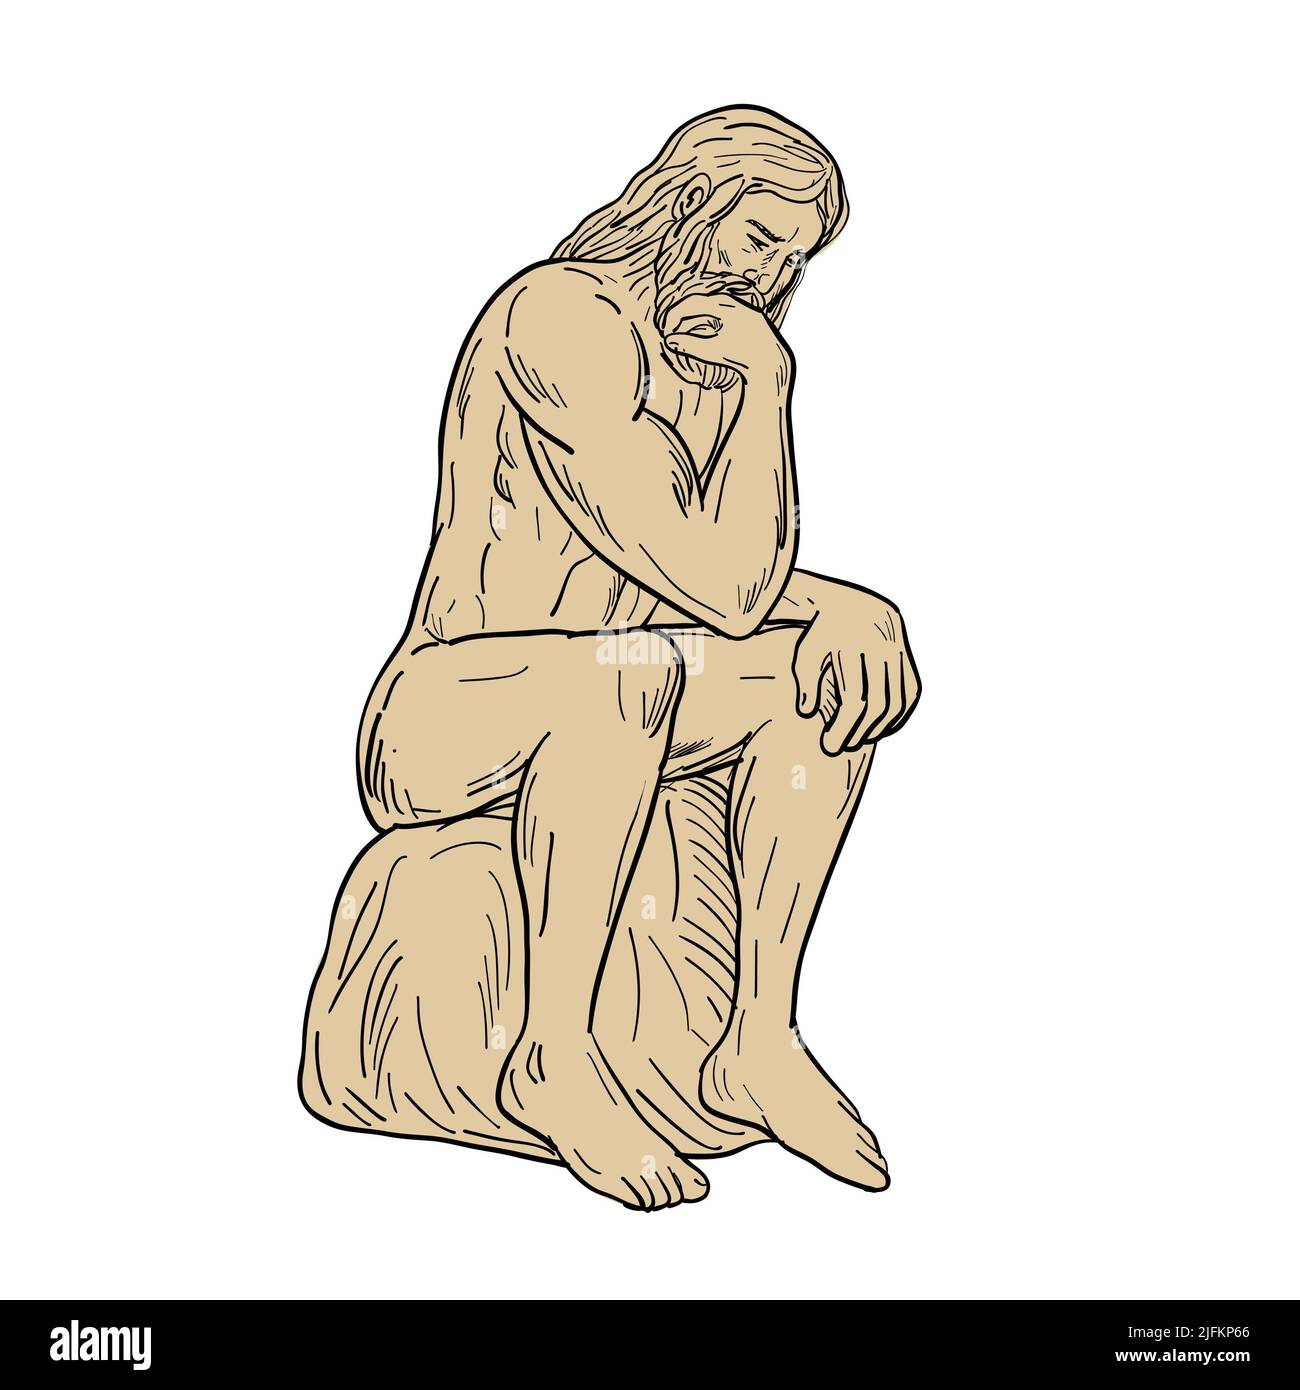 Drawing sketch style illustration of a man or thinker with full beard sitting down thinking on isolated white background. Stock Photo